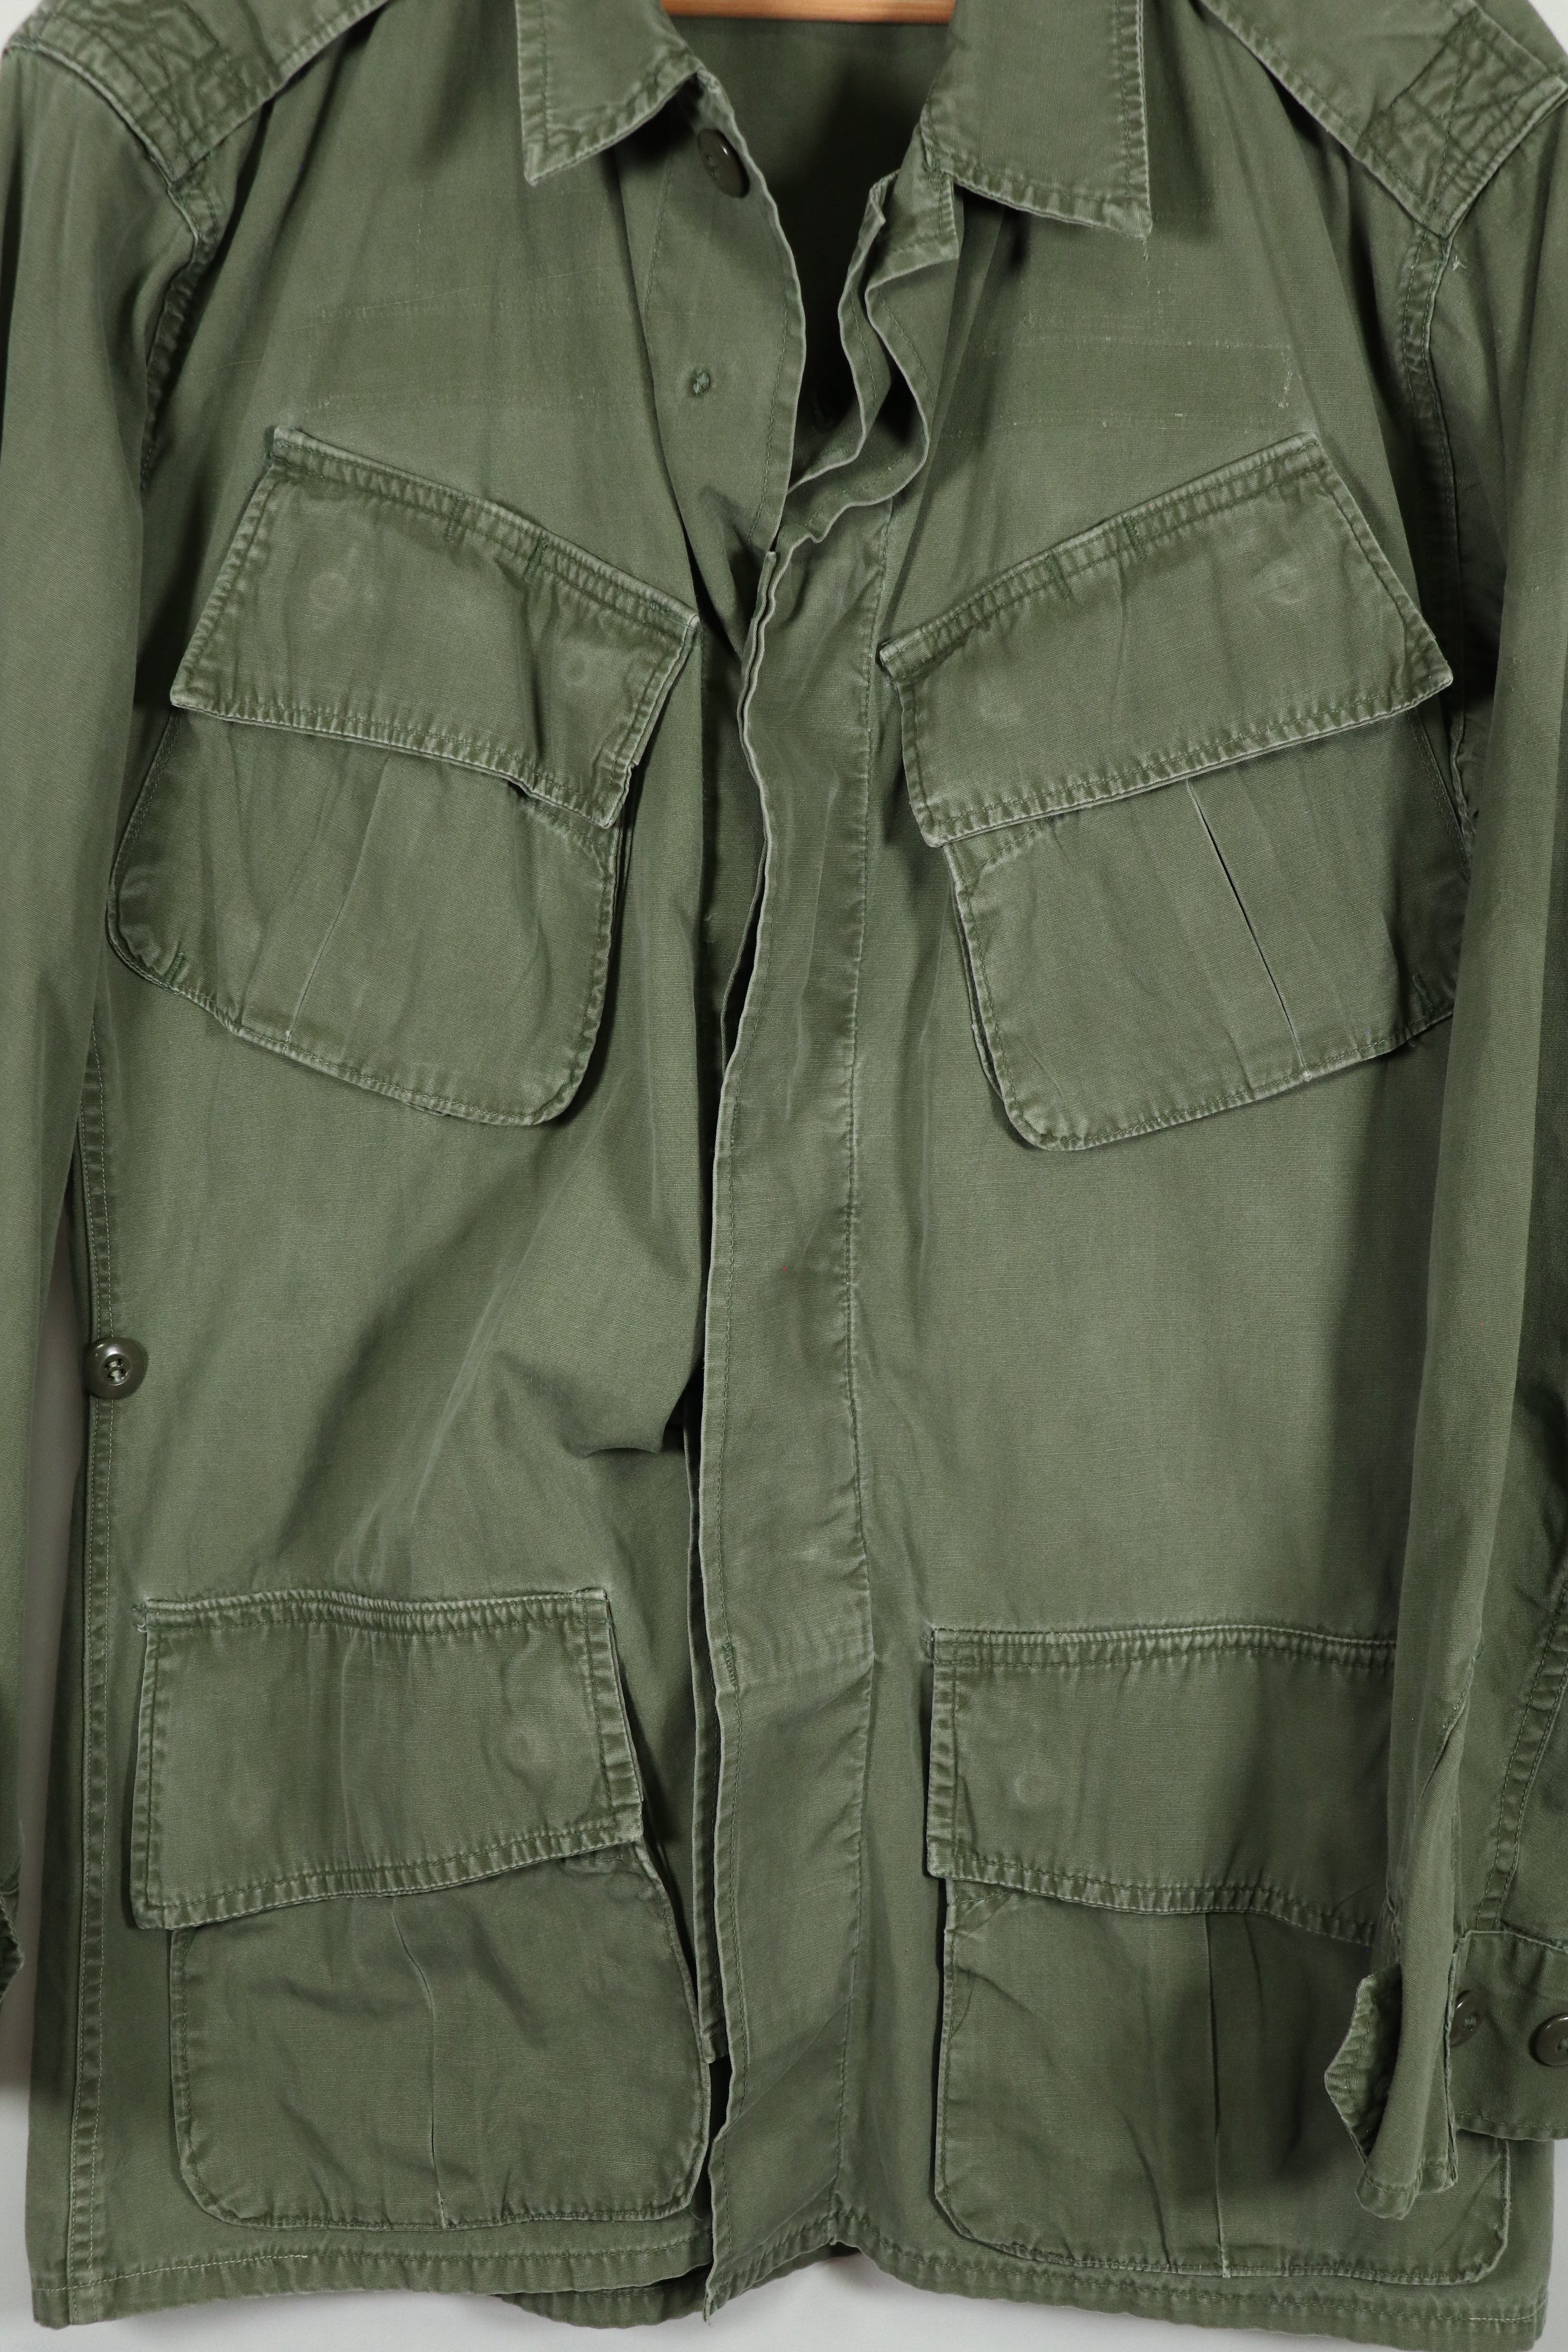 Real 2nd Model Jungle Fatigue Jacket, no size tag, used.